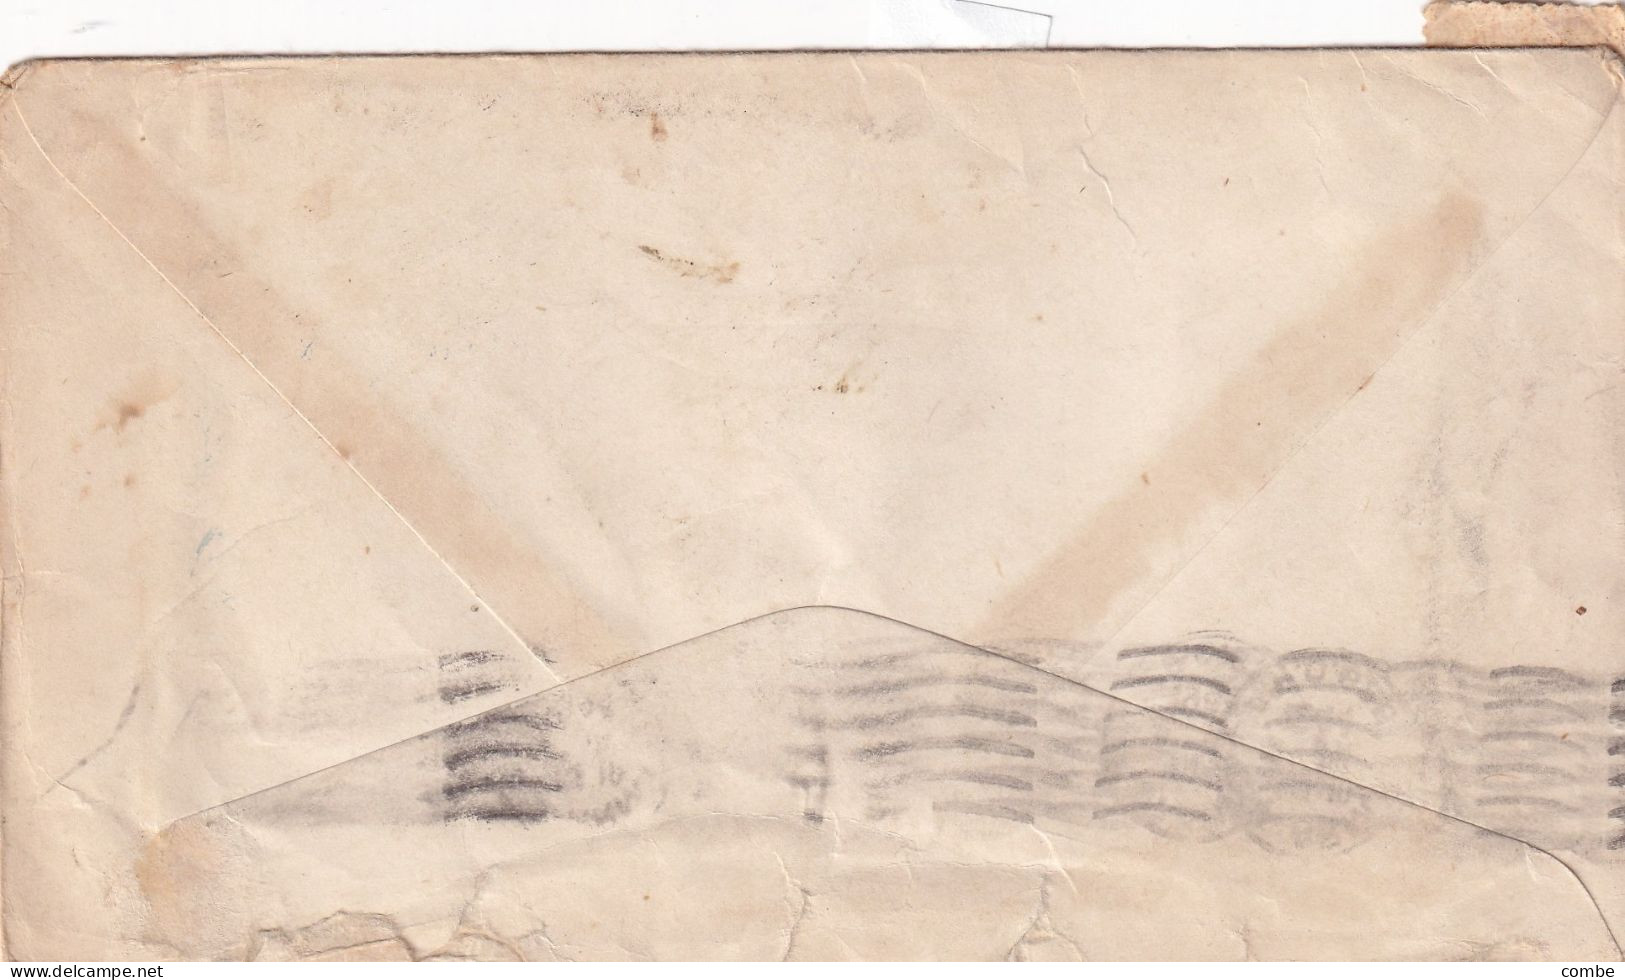 COVER US. 3 JUN 1944. APO 825. ALBROOK FIELD. CANAL ZONE. TO PHILA. PASSED BY EXAMINER. POSTAGE DUE 6 CENTS - Briefe U. Dokumente